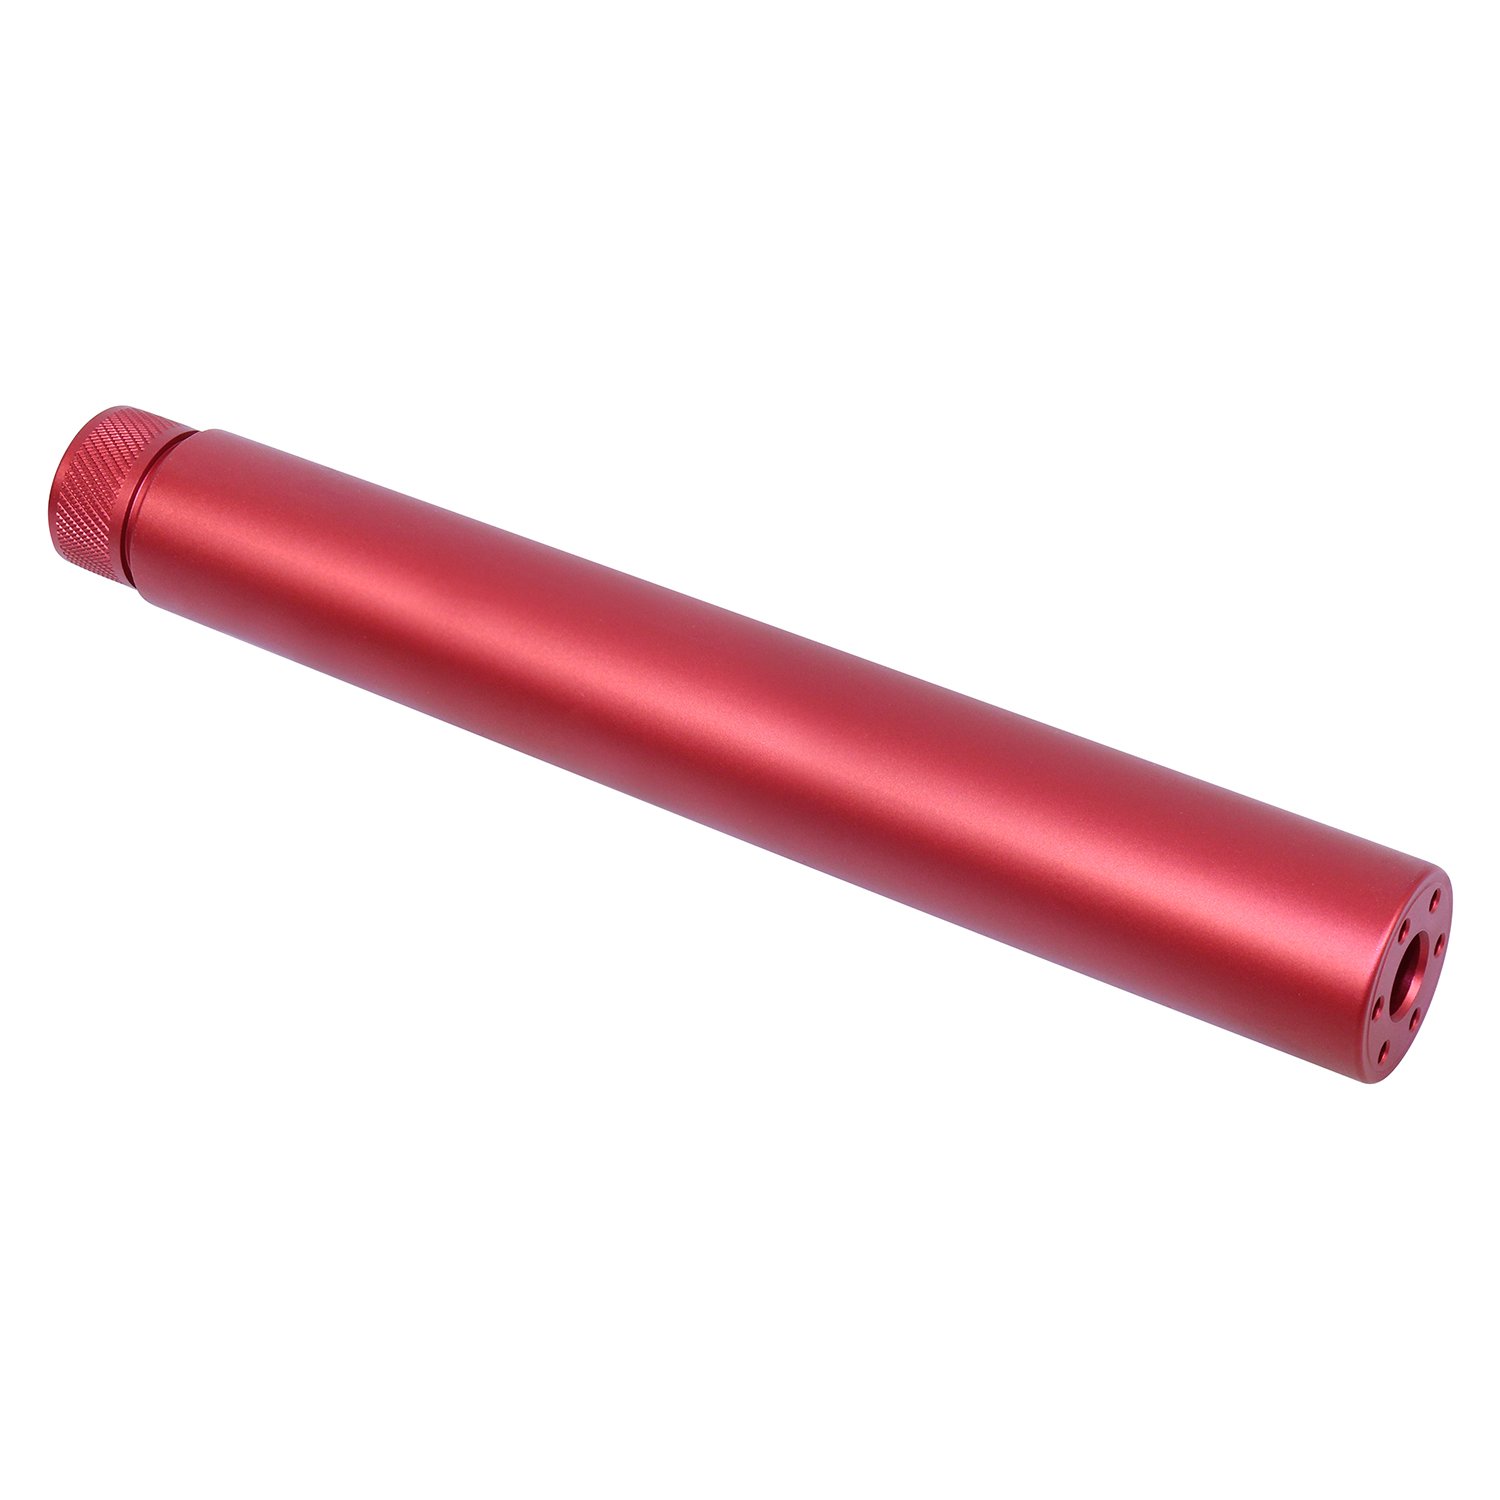 Red anodized AR-15 faux suppressor showcasing sleek design and precision engineering